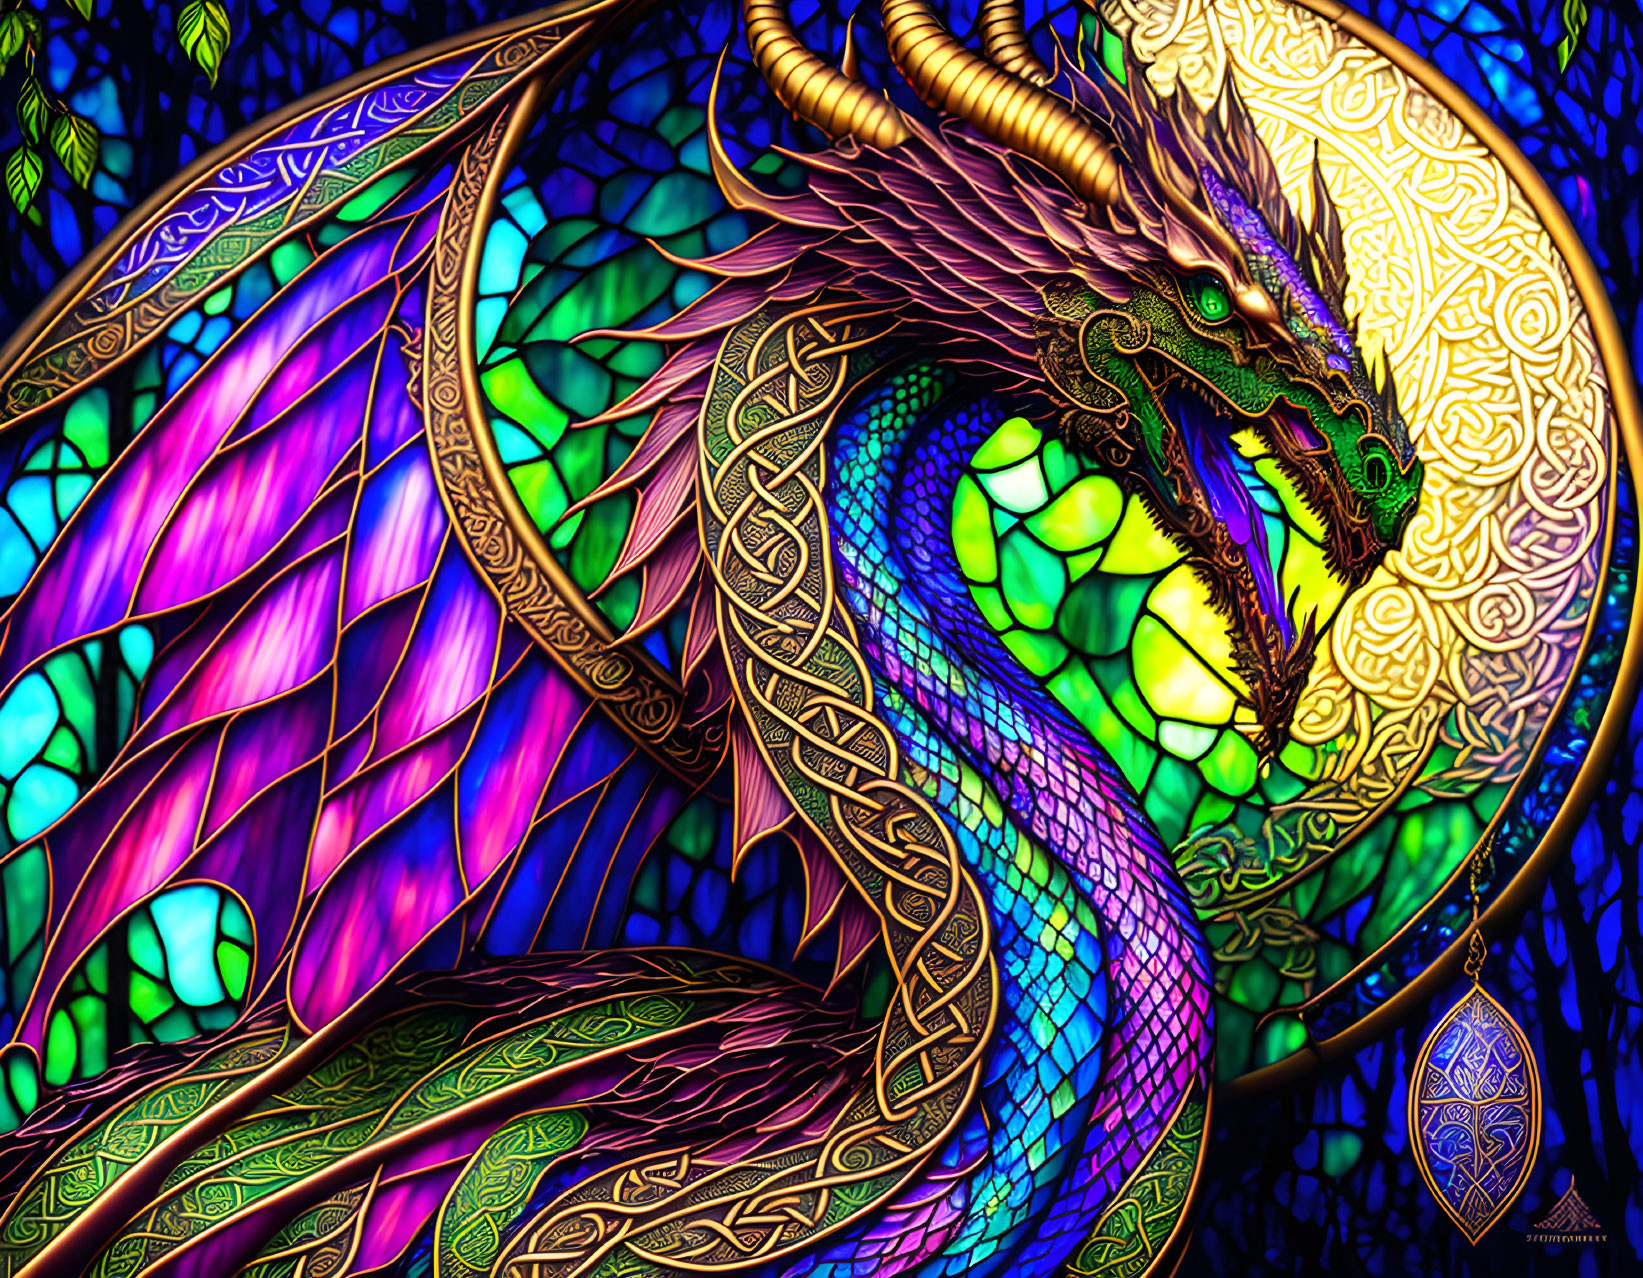 Colorful Dragon Illustration Against Celtic Stained Glass Background